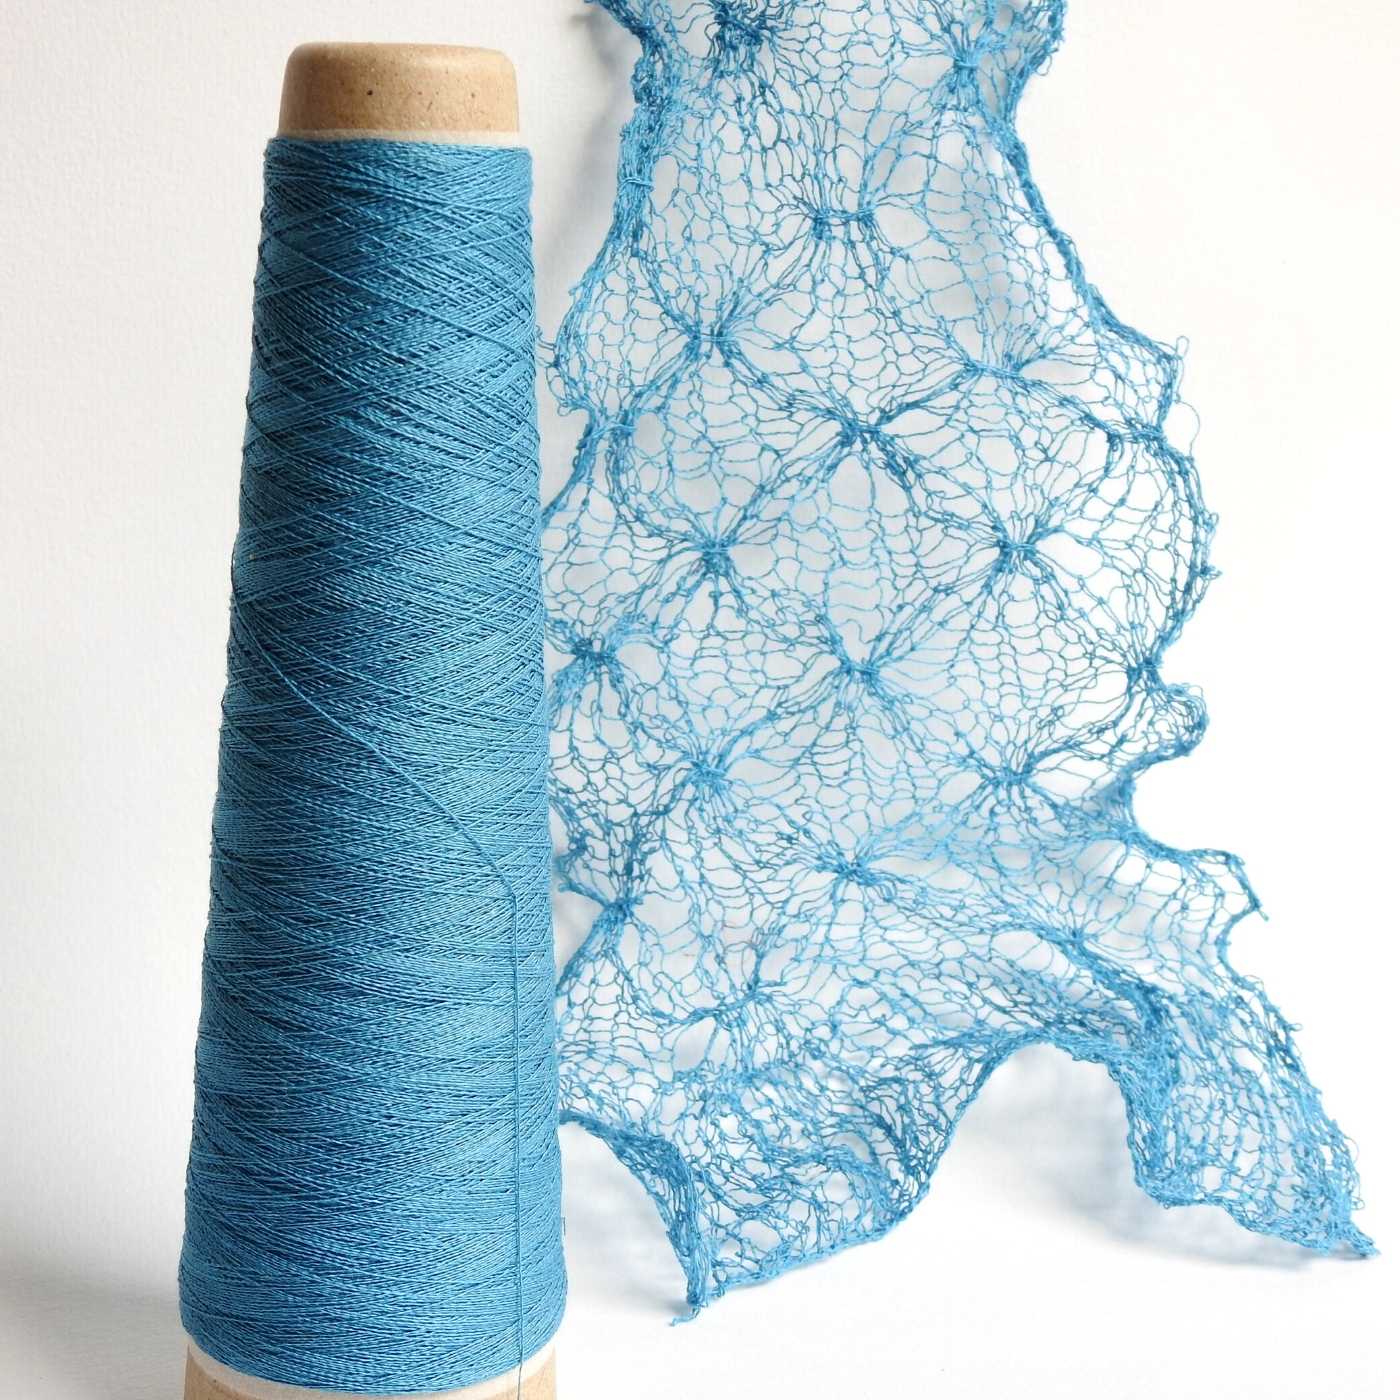 Knitted lace scarf (the Tin Roof pattern) using Habu Textiles Silk Stainless Steel yarn in Sky